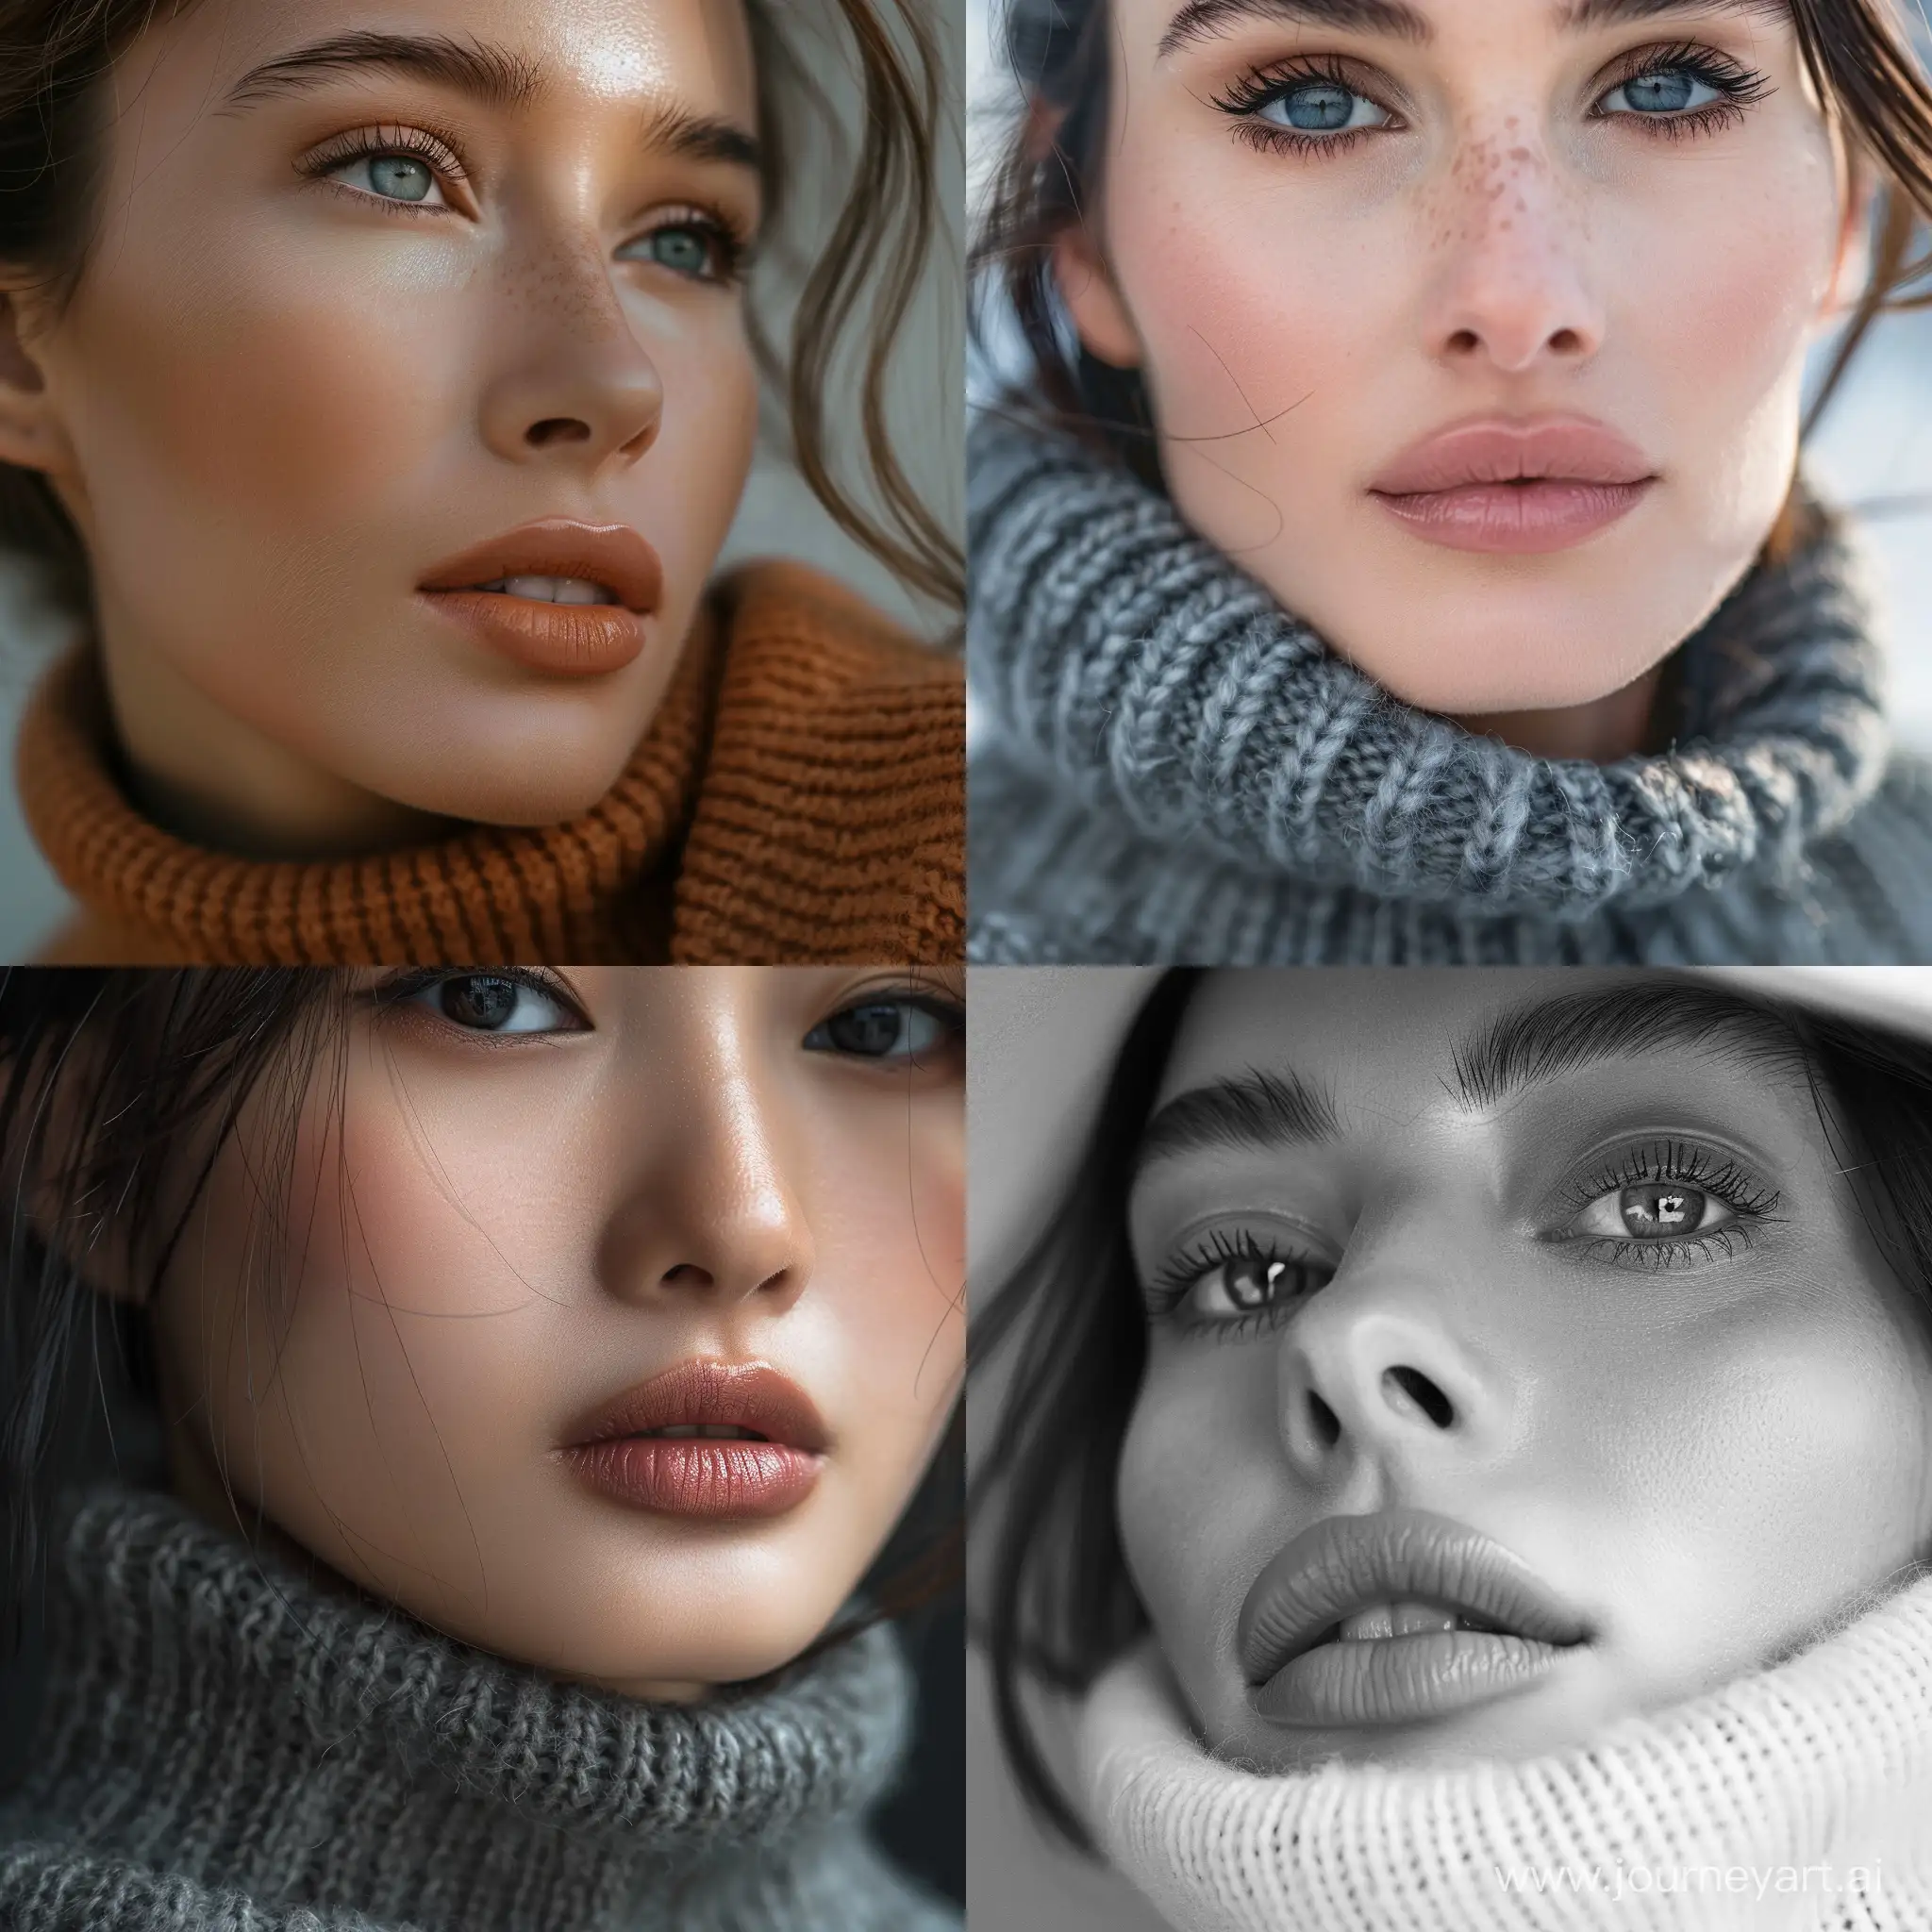 Lady in turtle neck face closeup 